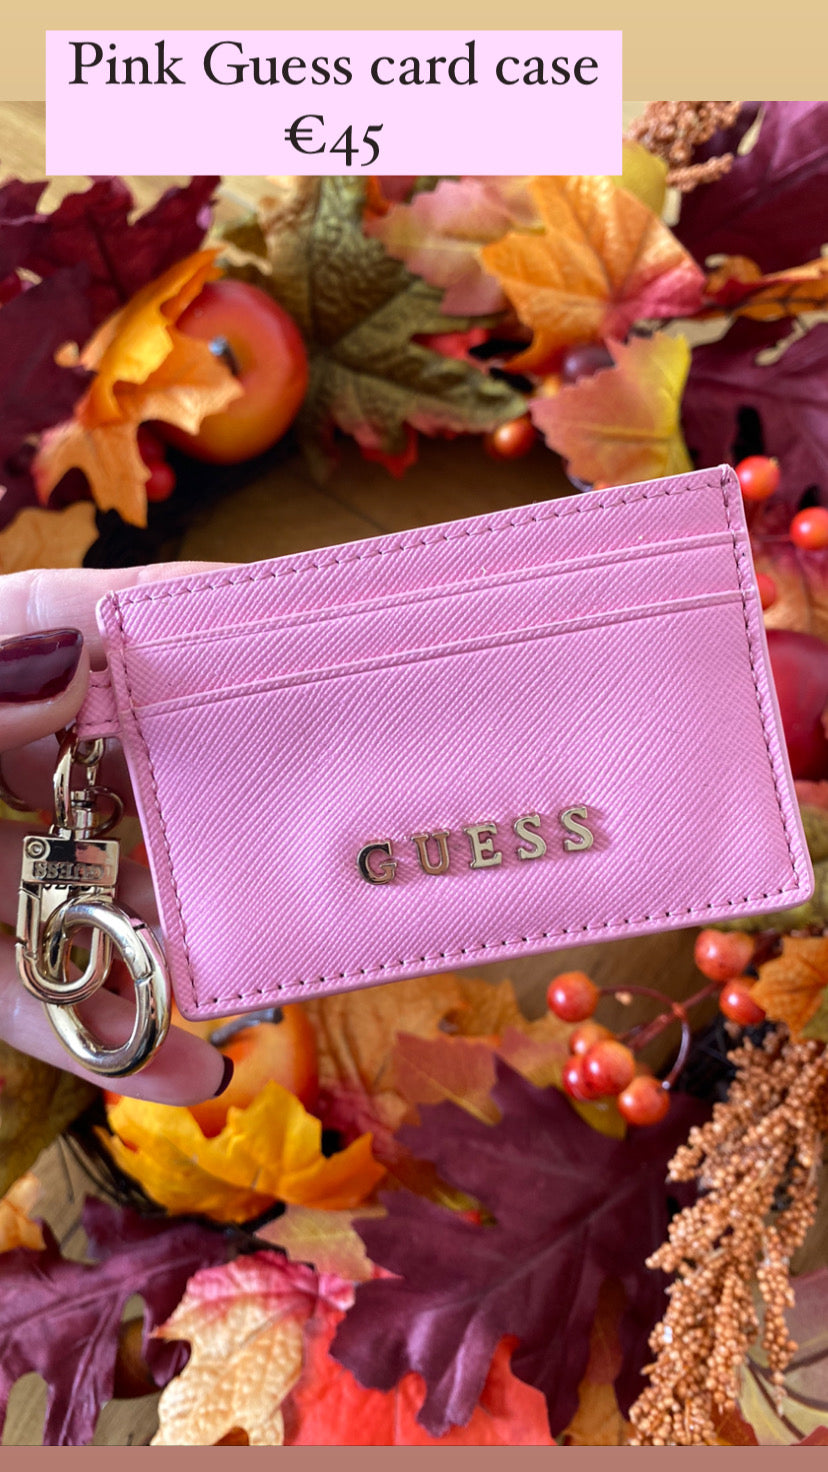 Pink Guess card case